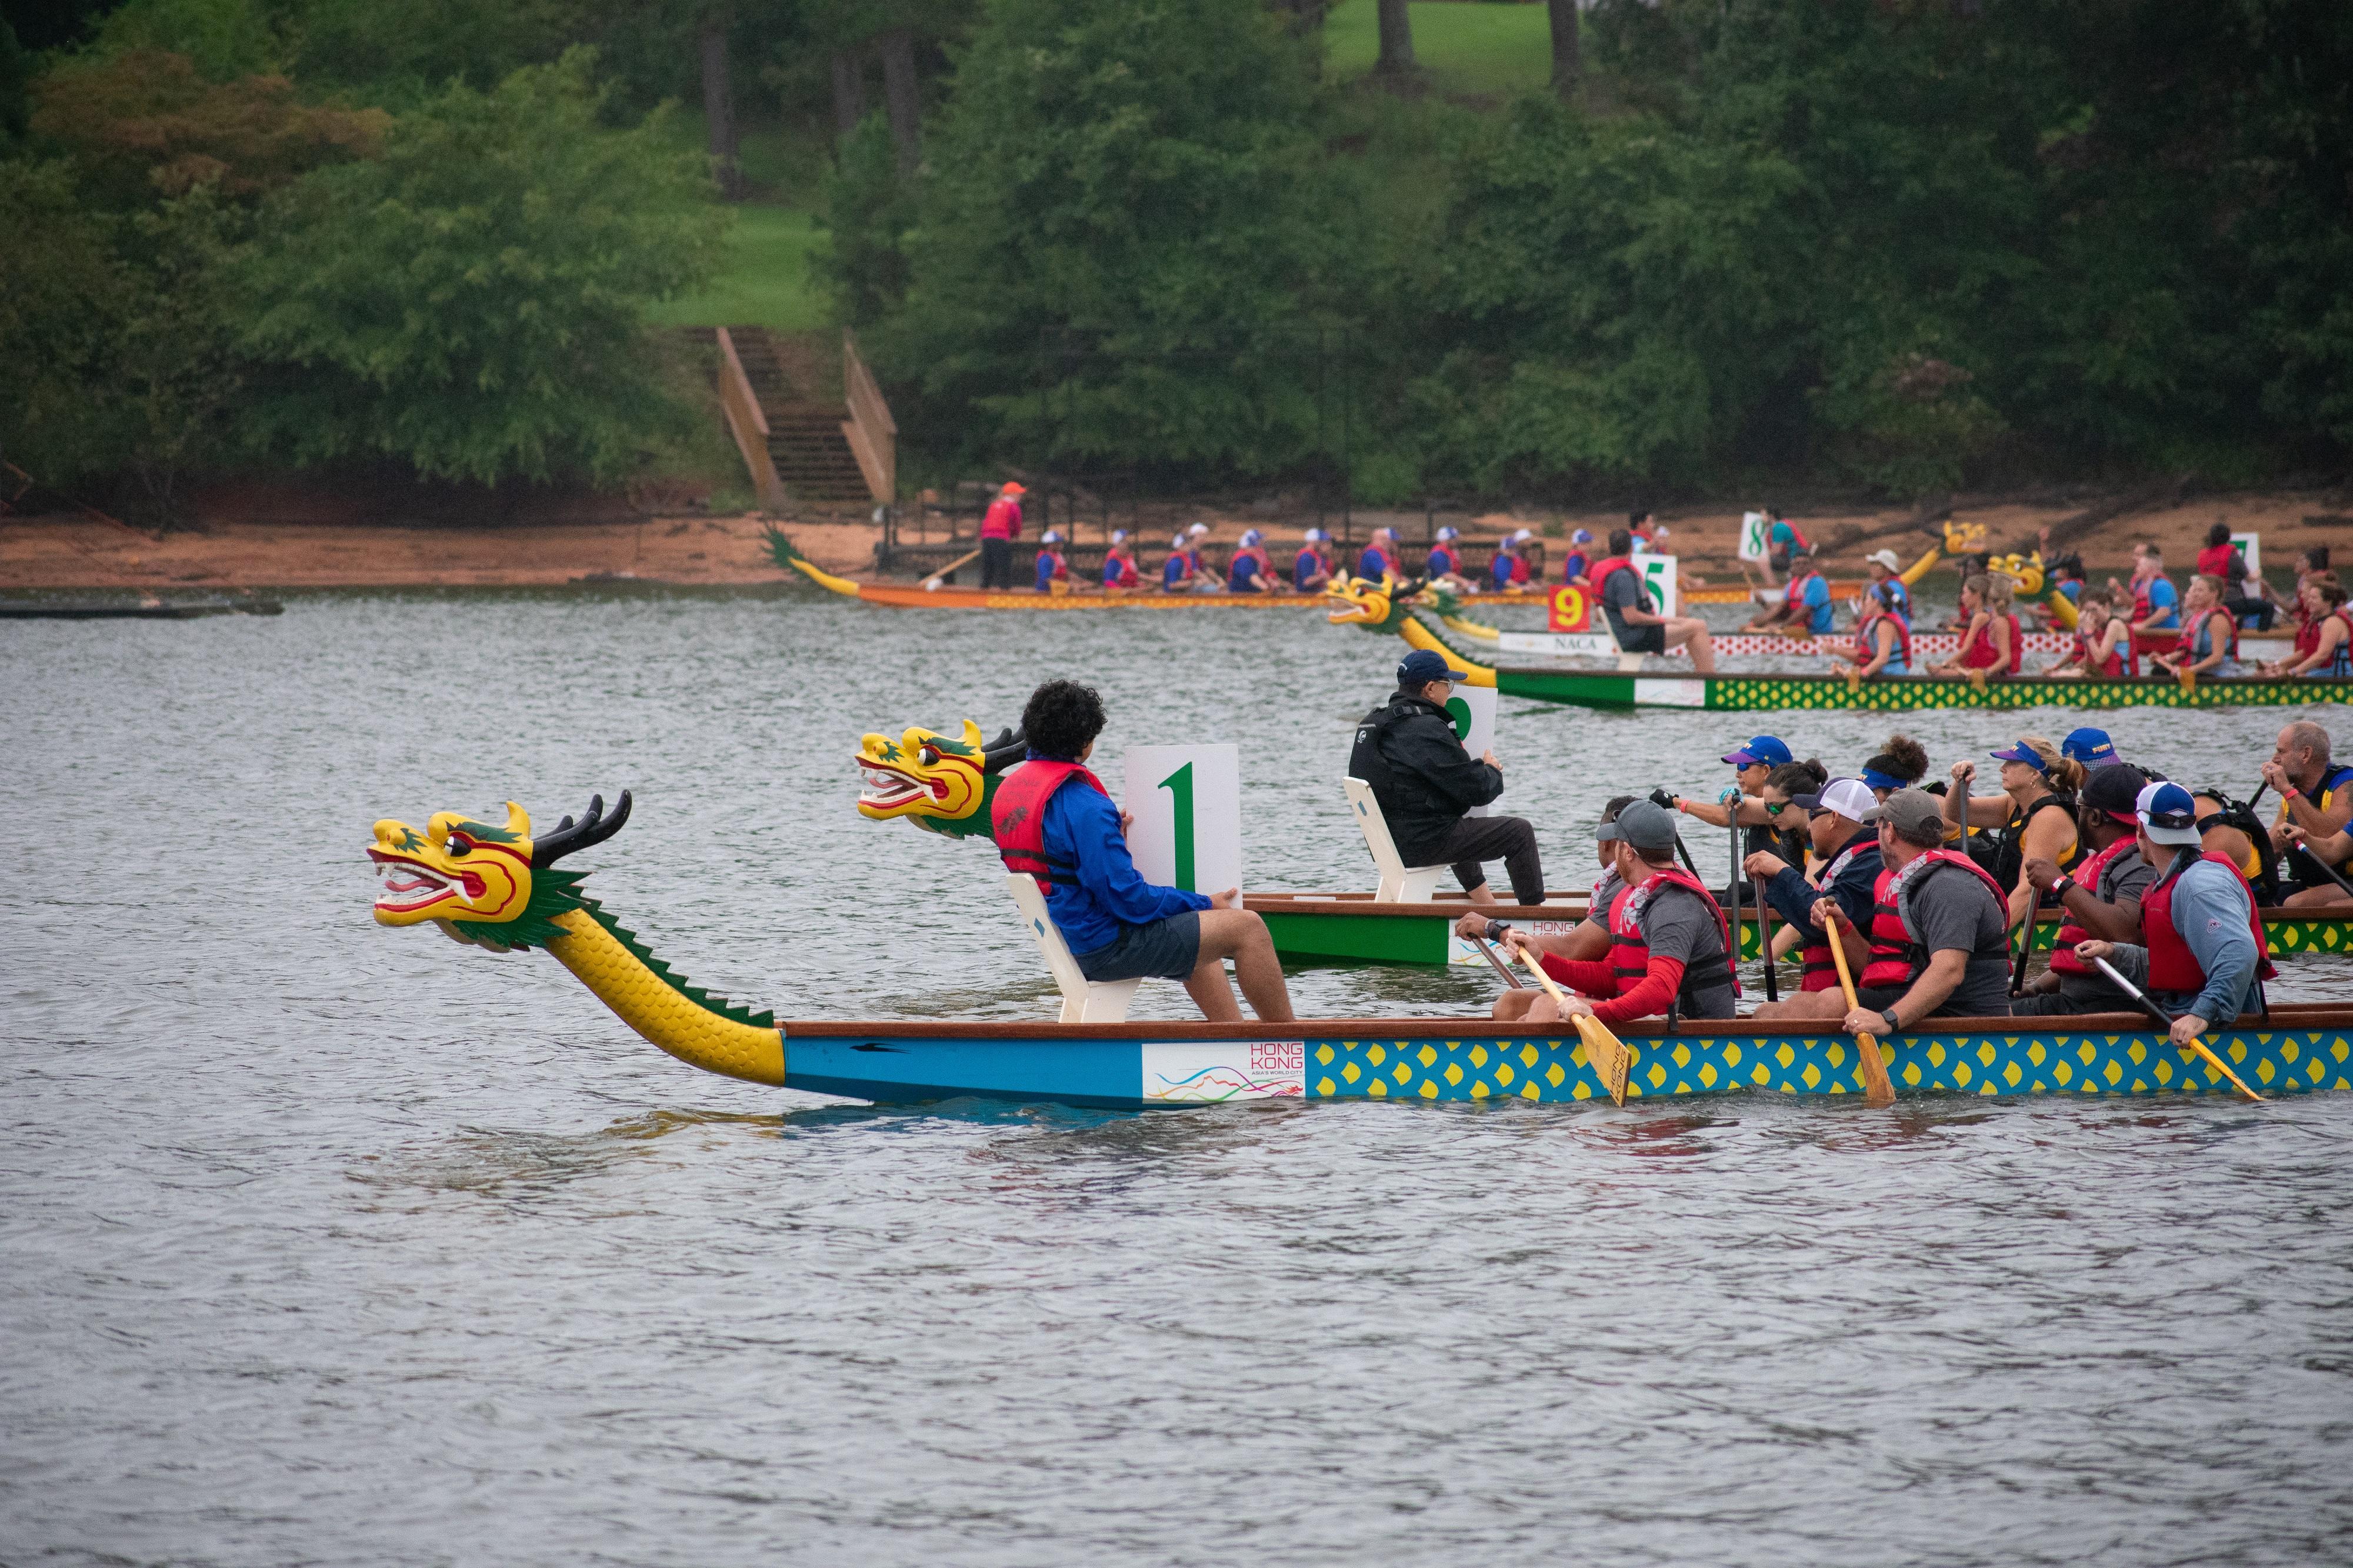 Supported by the Hong Kong Economic and Trade Office in New York, the Atlanta
Hong Kong Dragon Boat Festival celebrated its grand return at the Lake Lanier Olympic Park on September 10 (Atlanta time), with 56 teams from Florida, Georgia, North Carolina, South Carolina, and Tennessee participating.